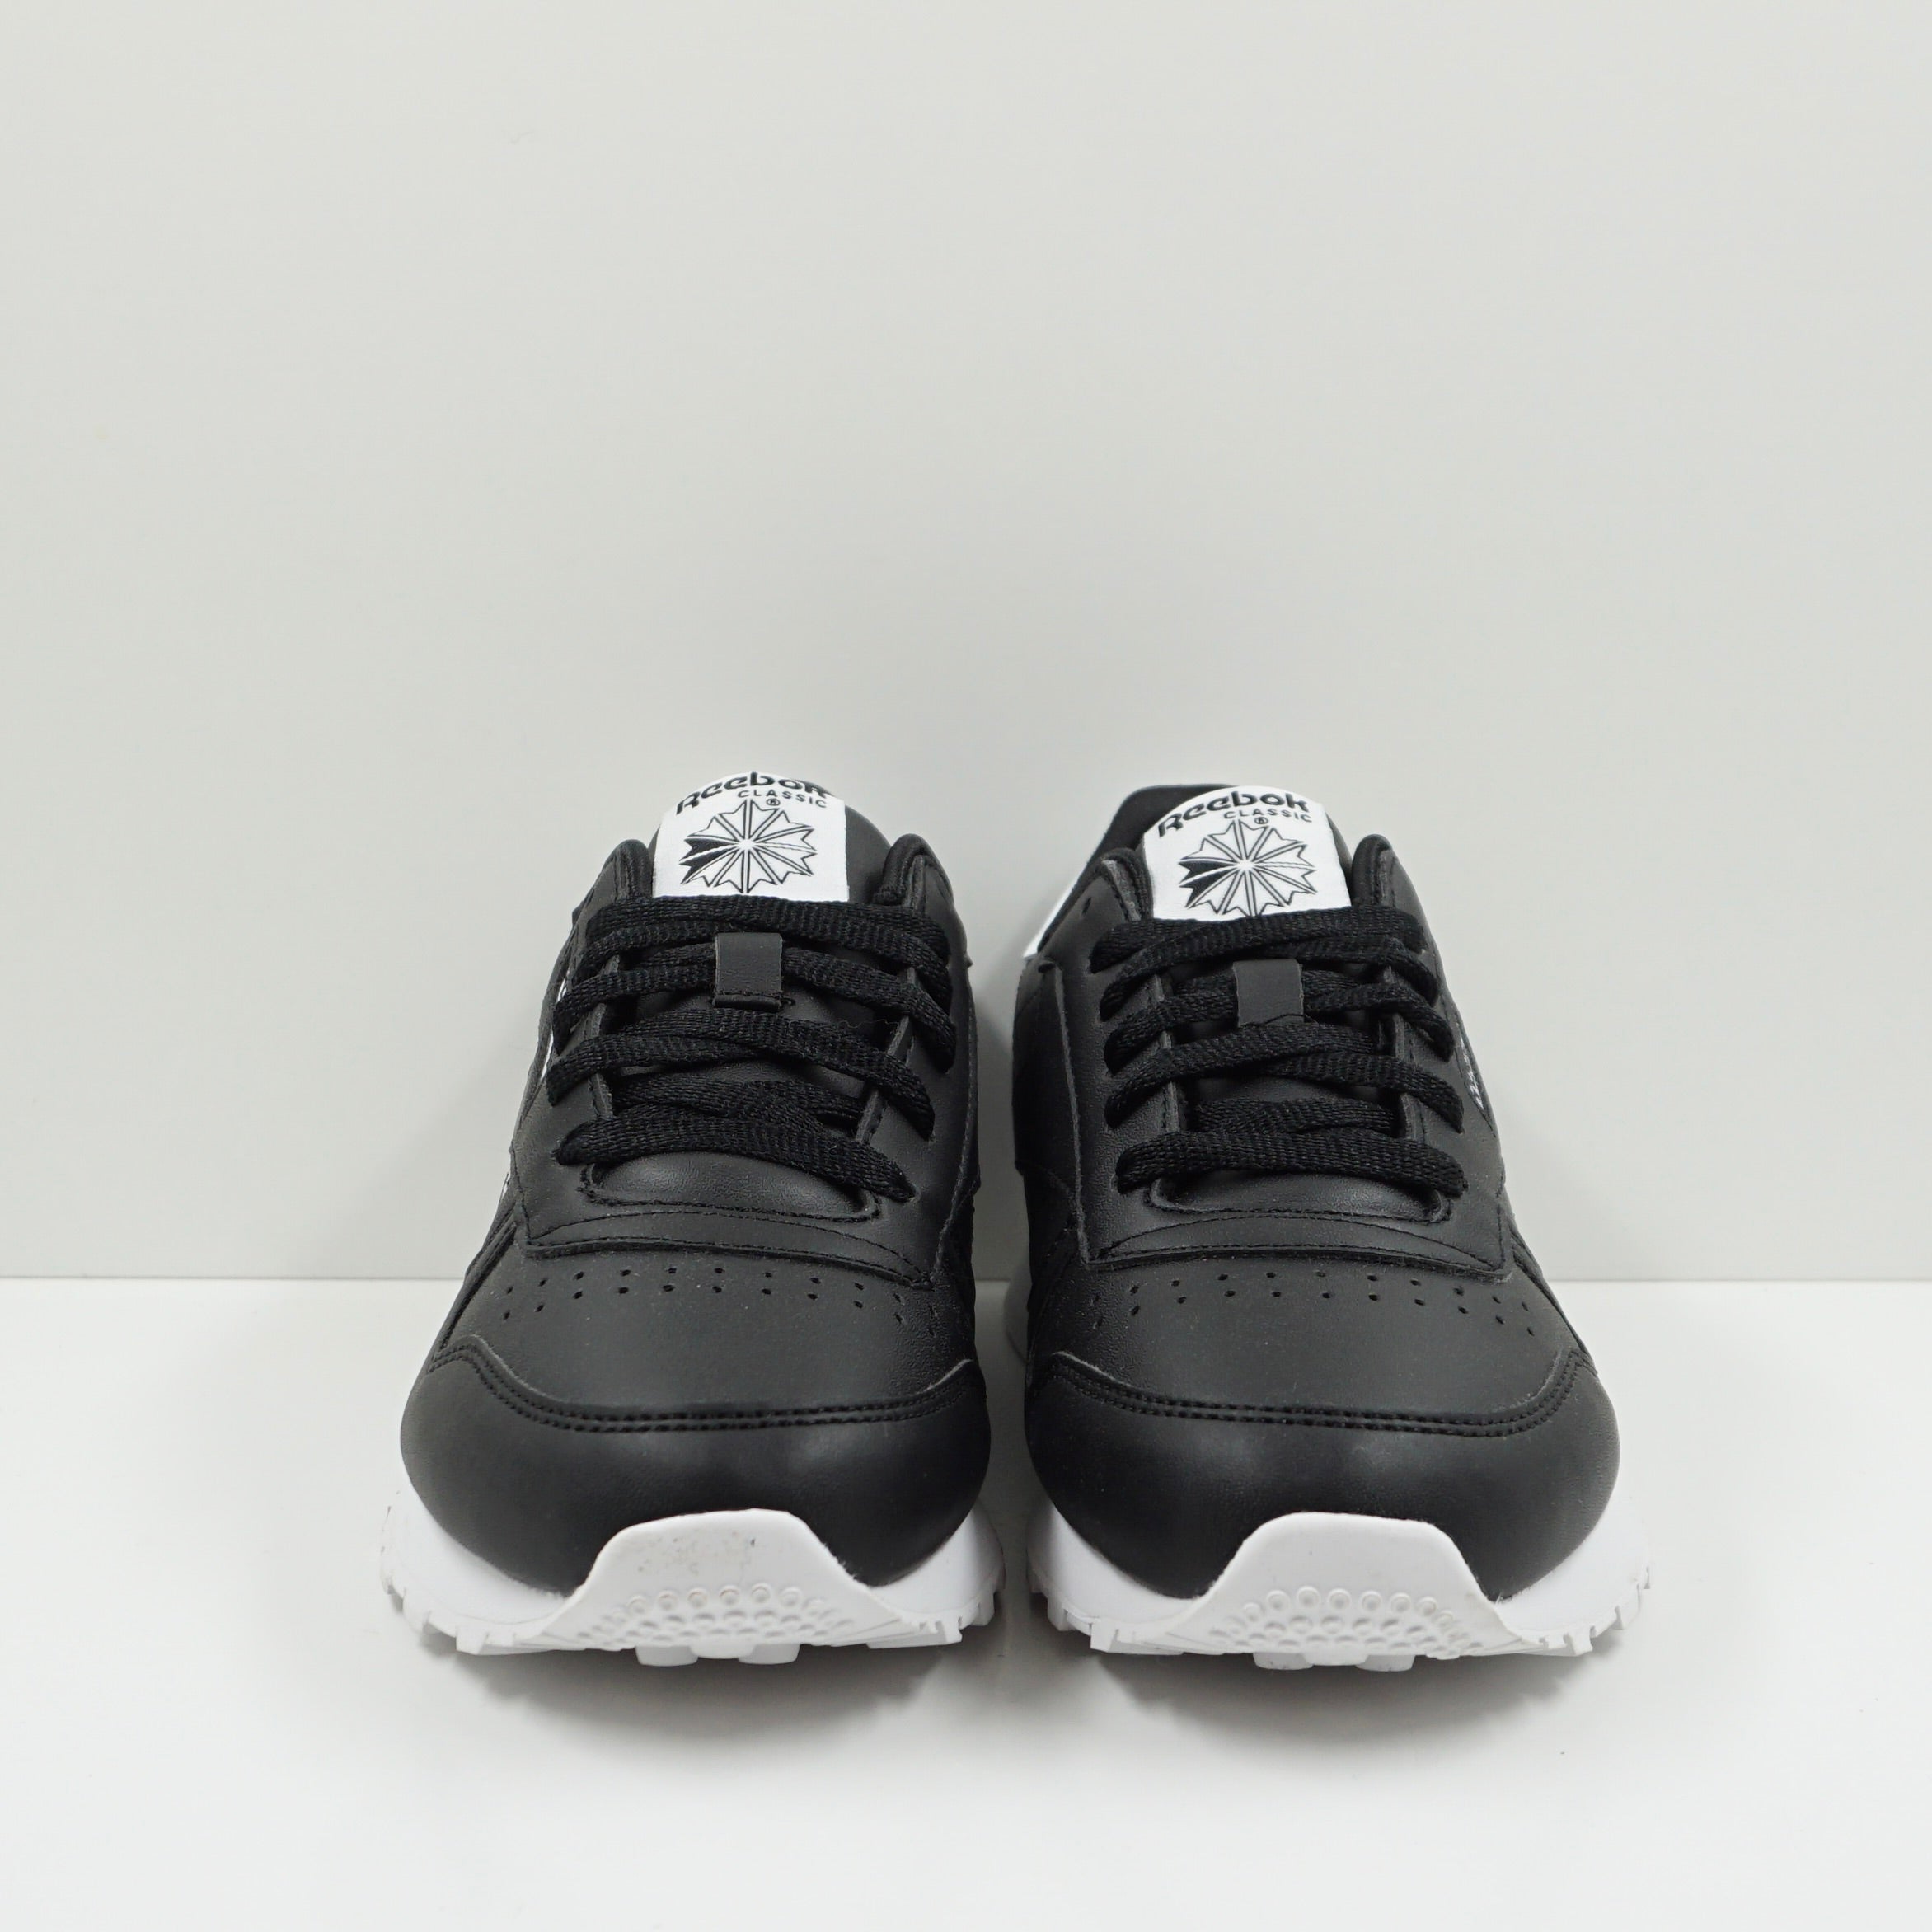 Reebok Classic Leather Flower Crowns Black White